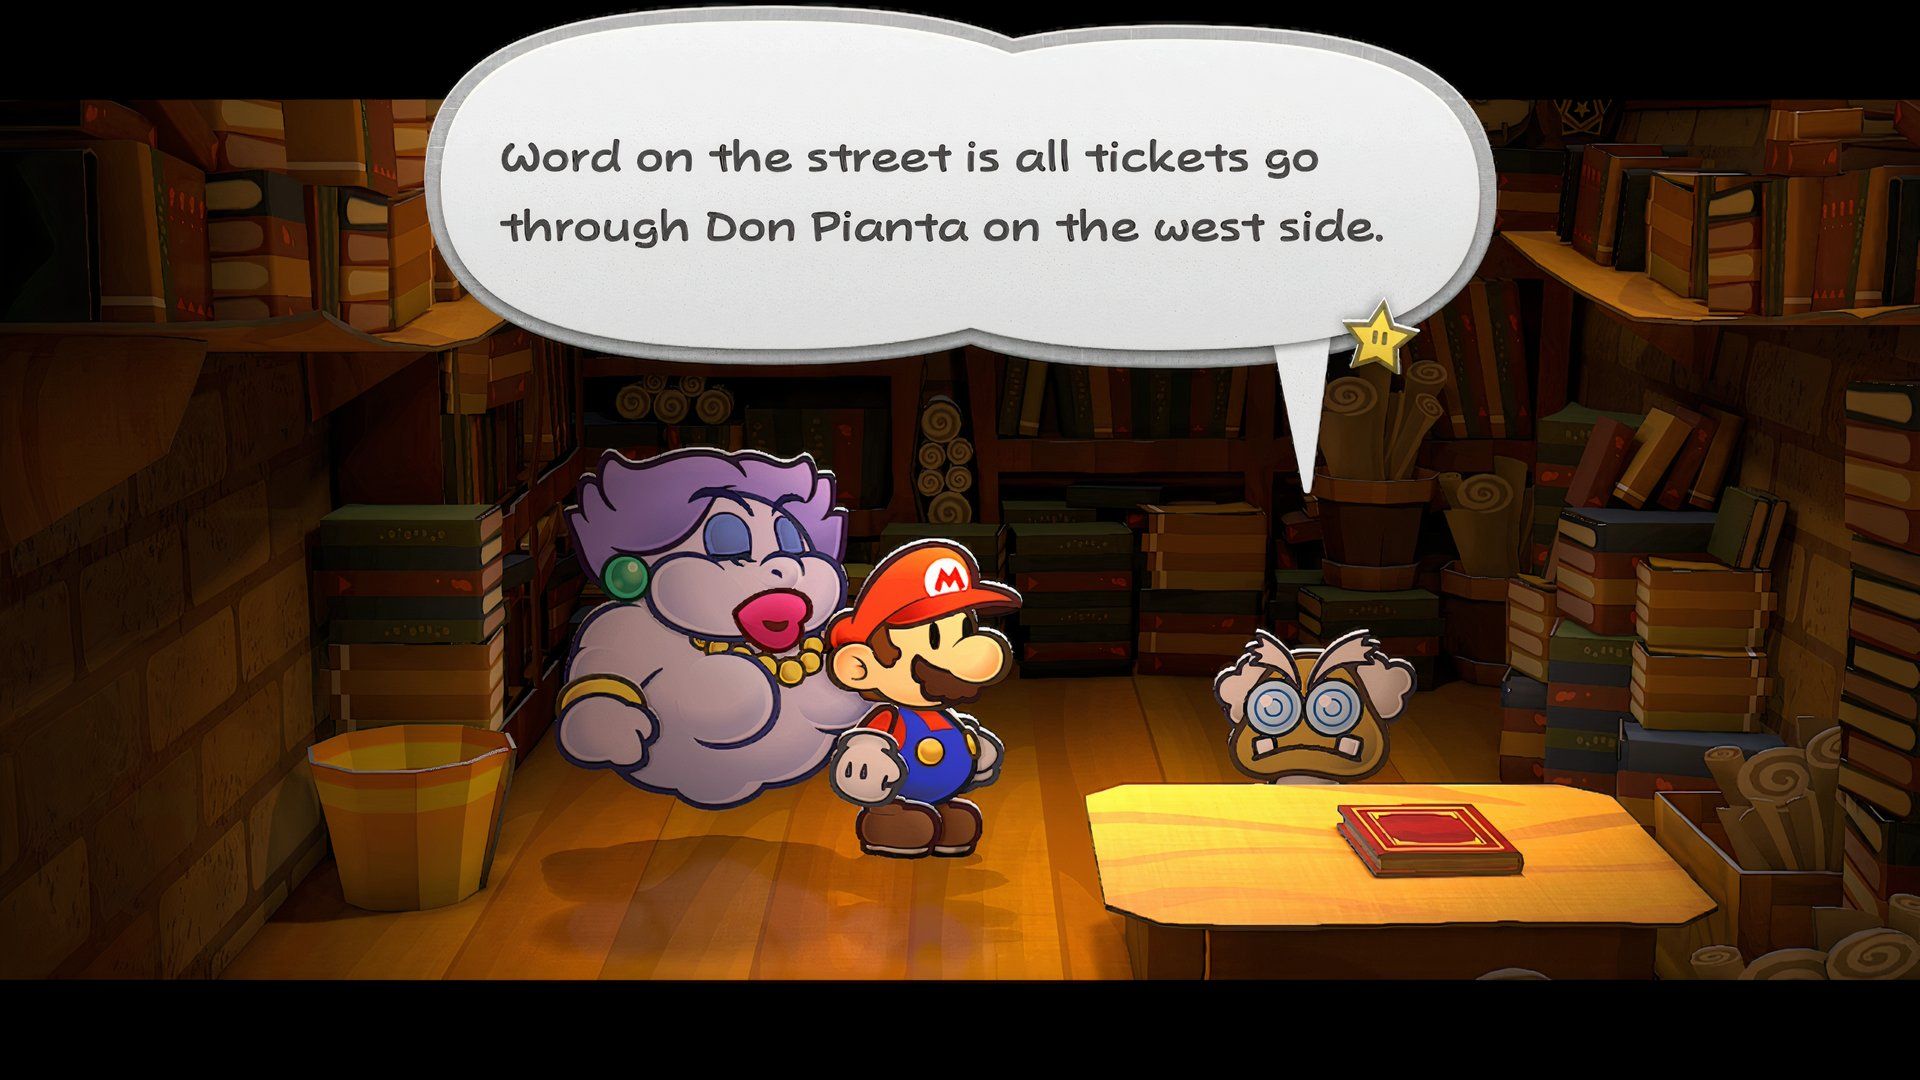 Paper Mario: The Thousand-Year Door - Professor Frankly Tells Mario about Don Pianta